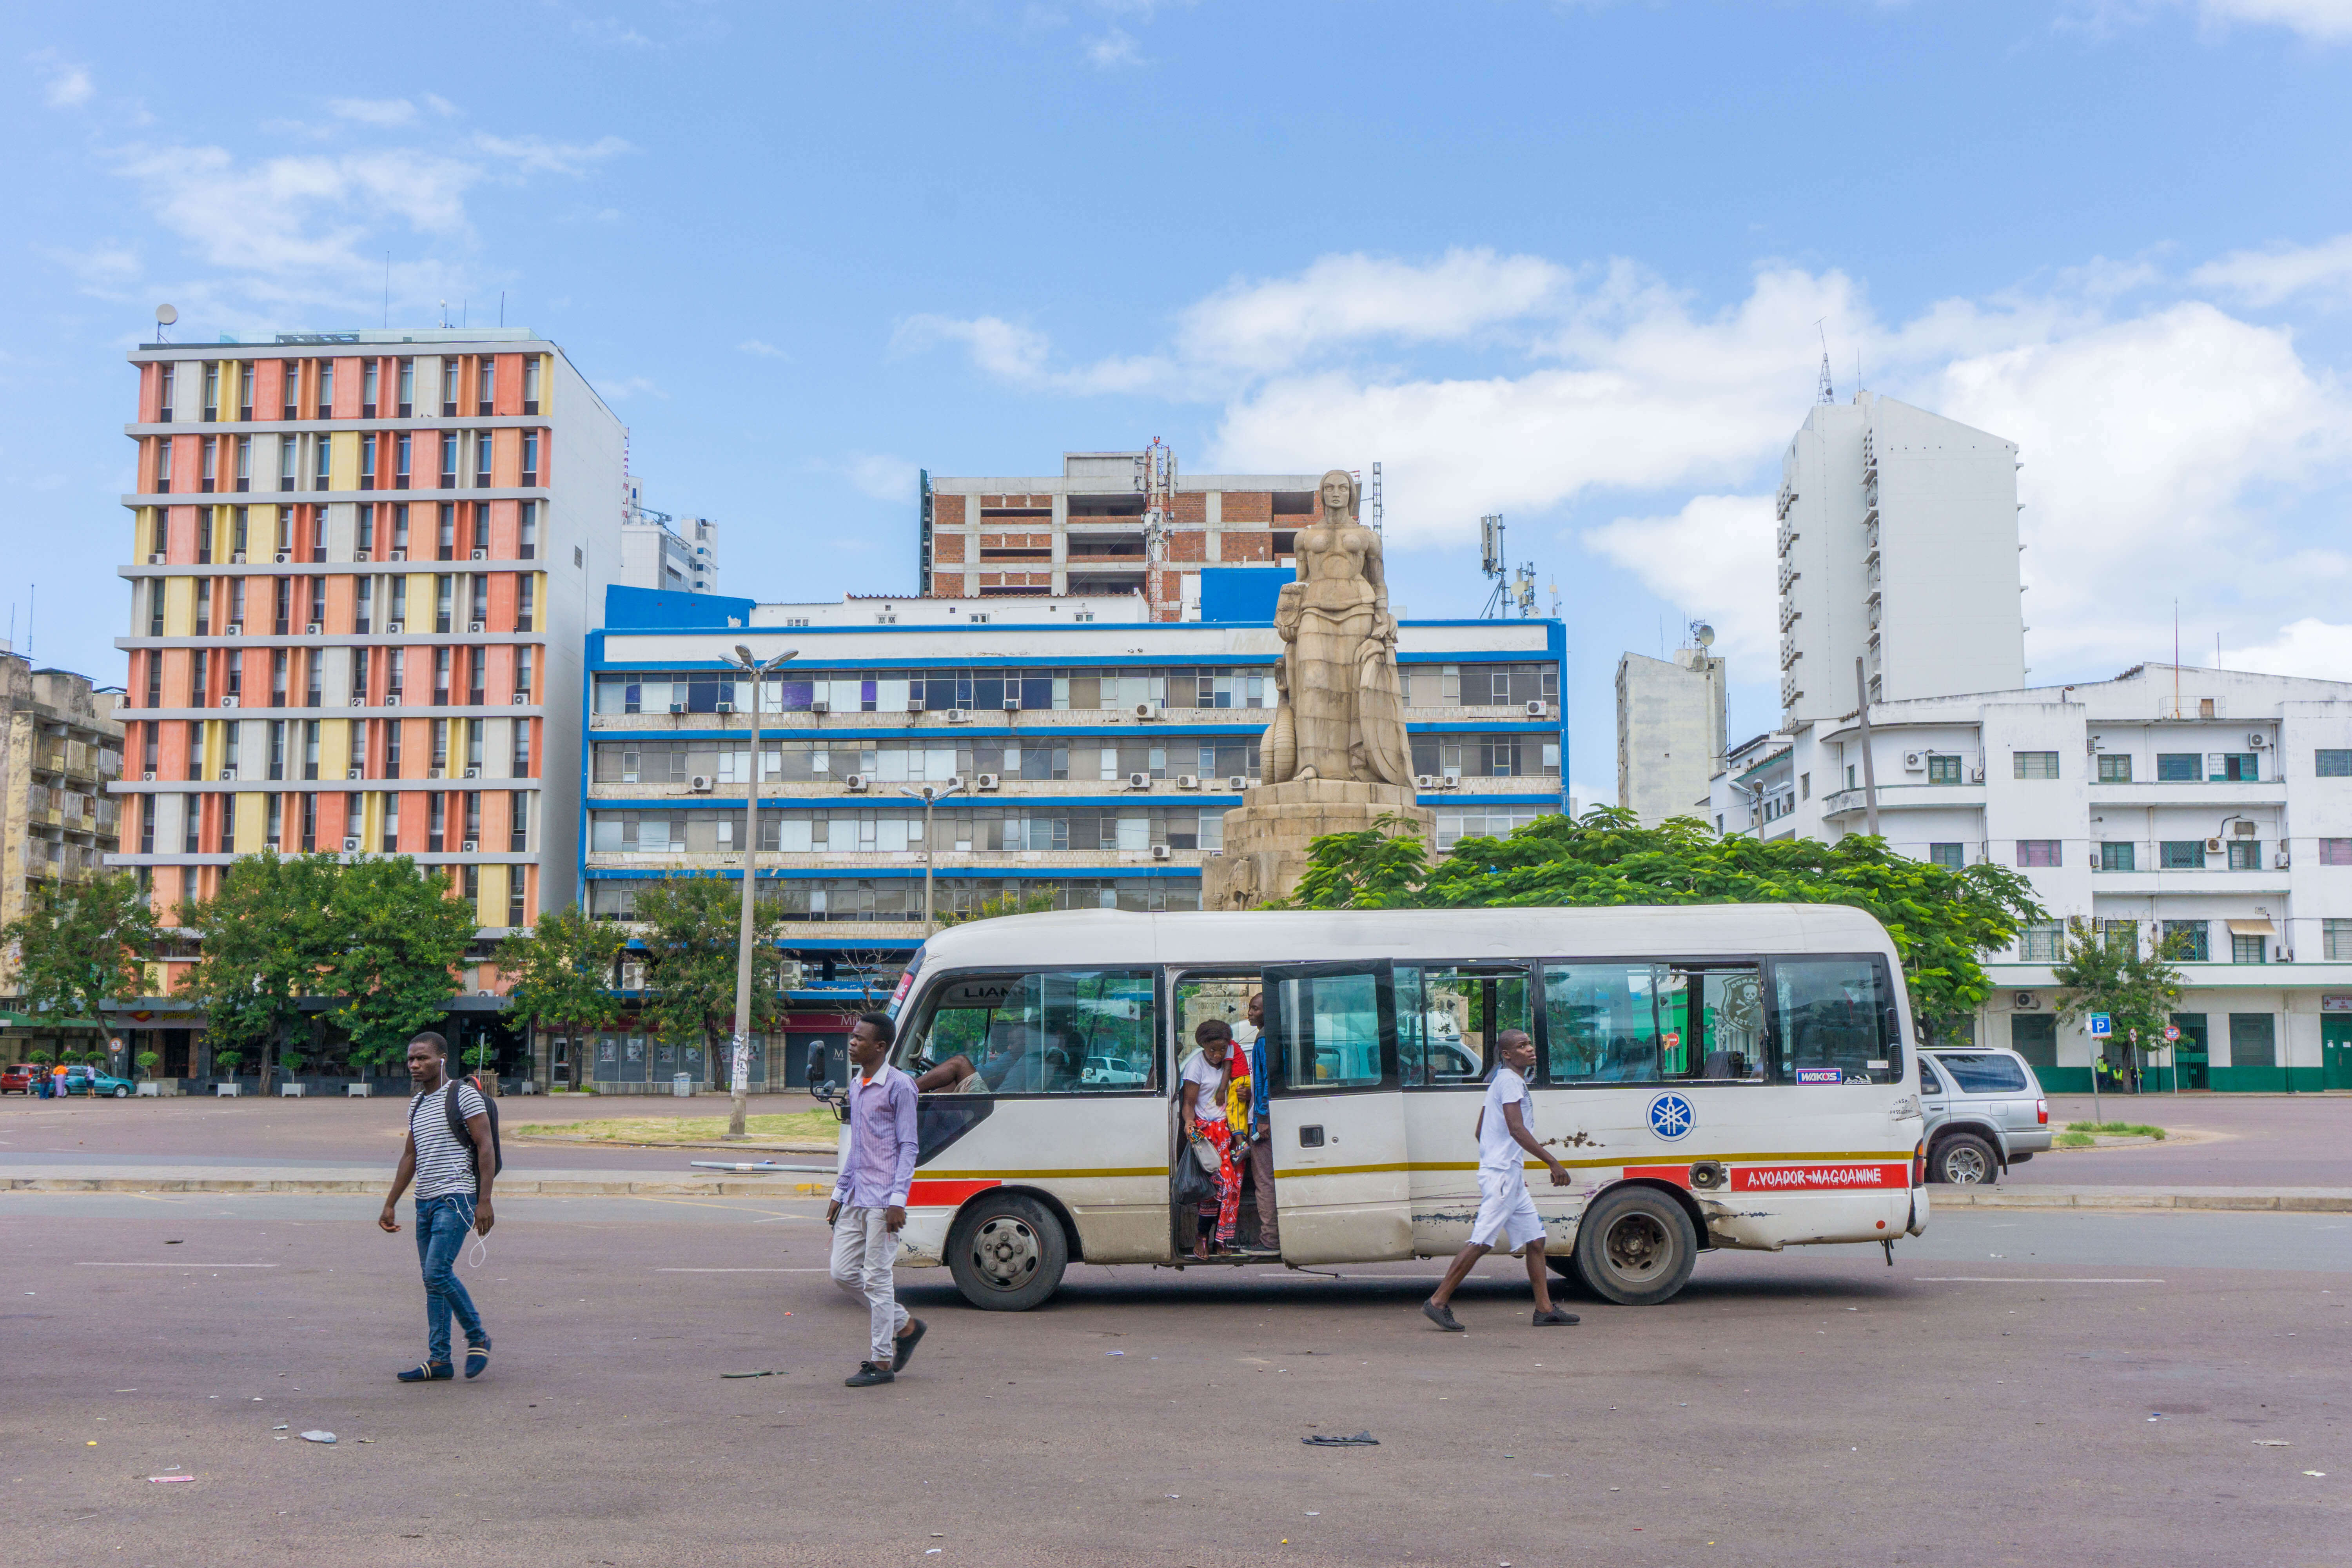 Top 10 Things to Do in Maputo, Mozambique (plus 1 you can’t skip)